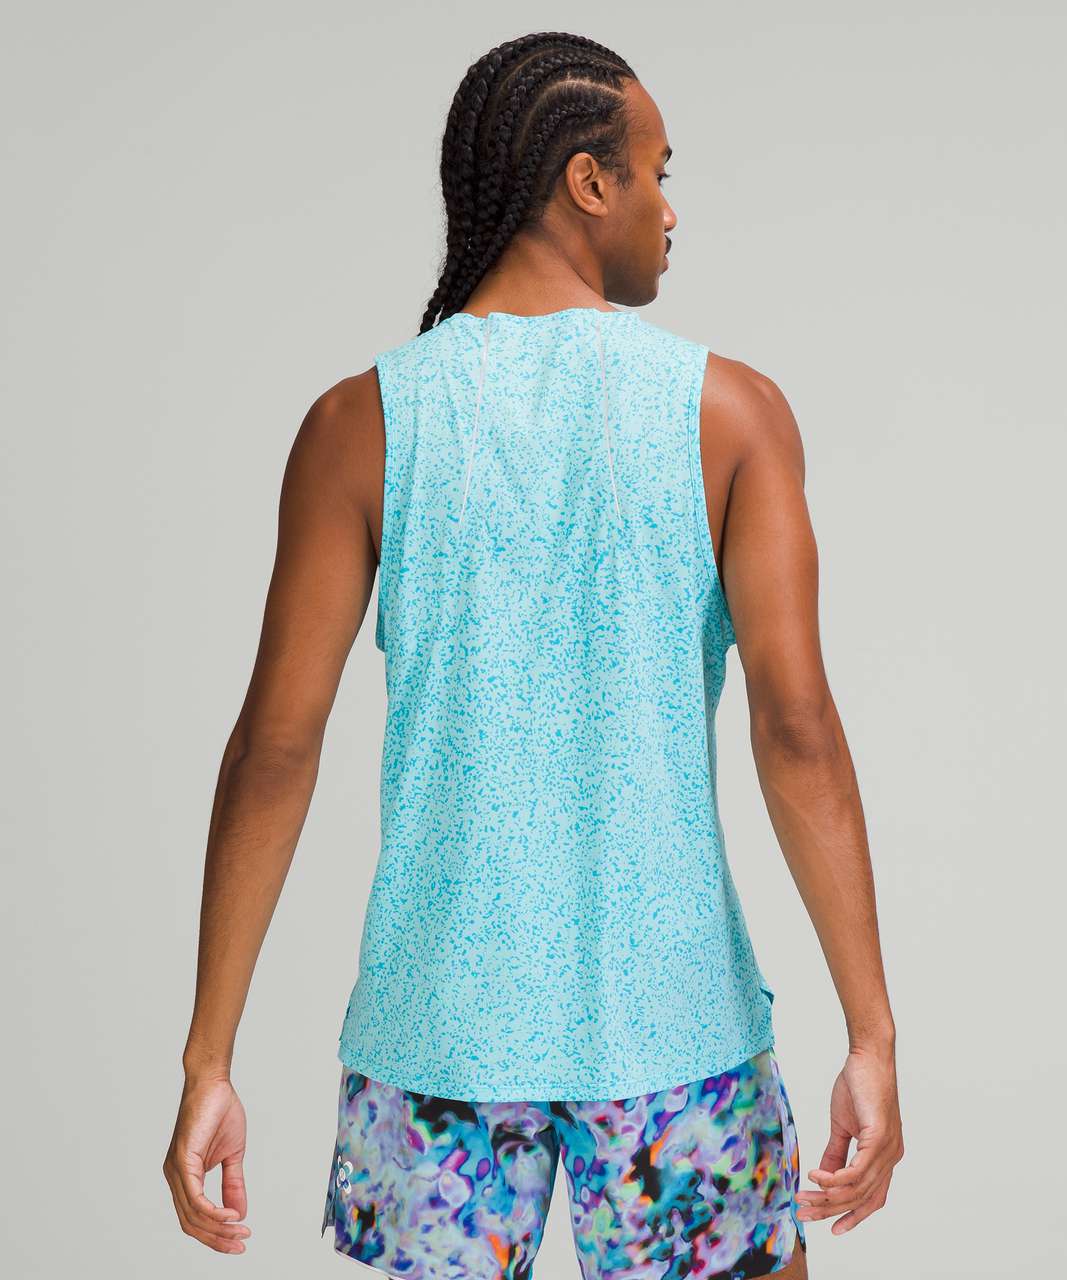 Lululemon Seawheeze Fast and Free Tank Top - Outer Pace Speckle Cyan Blue Turquoise Tide